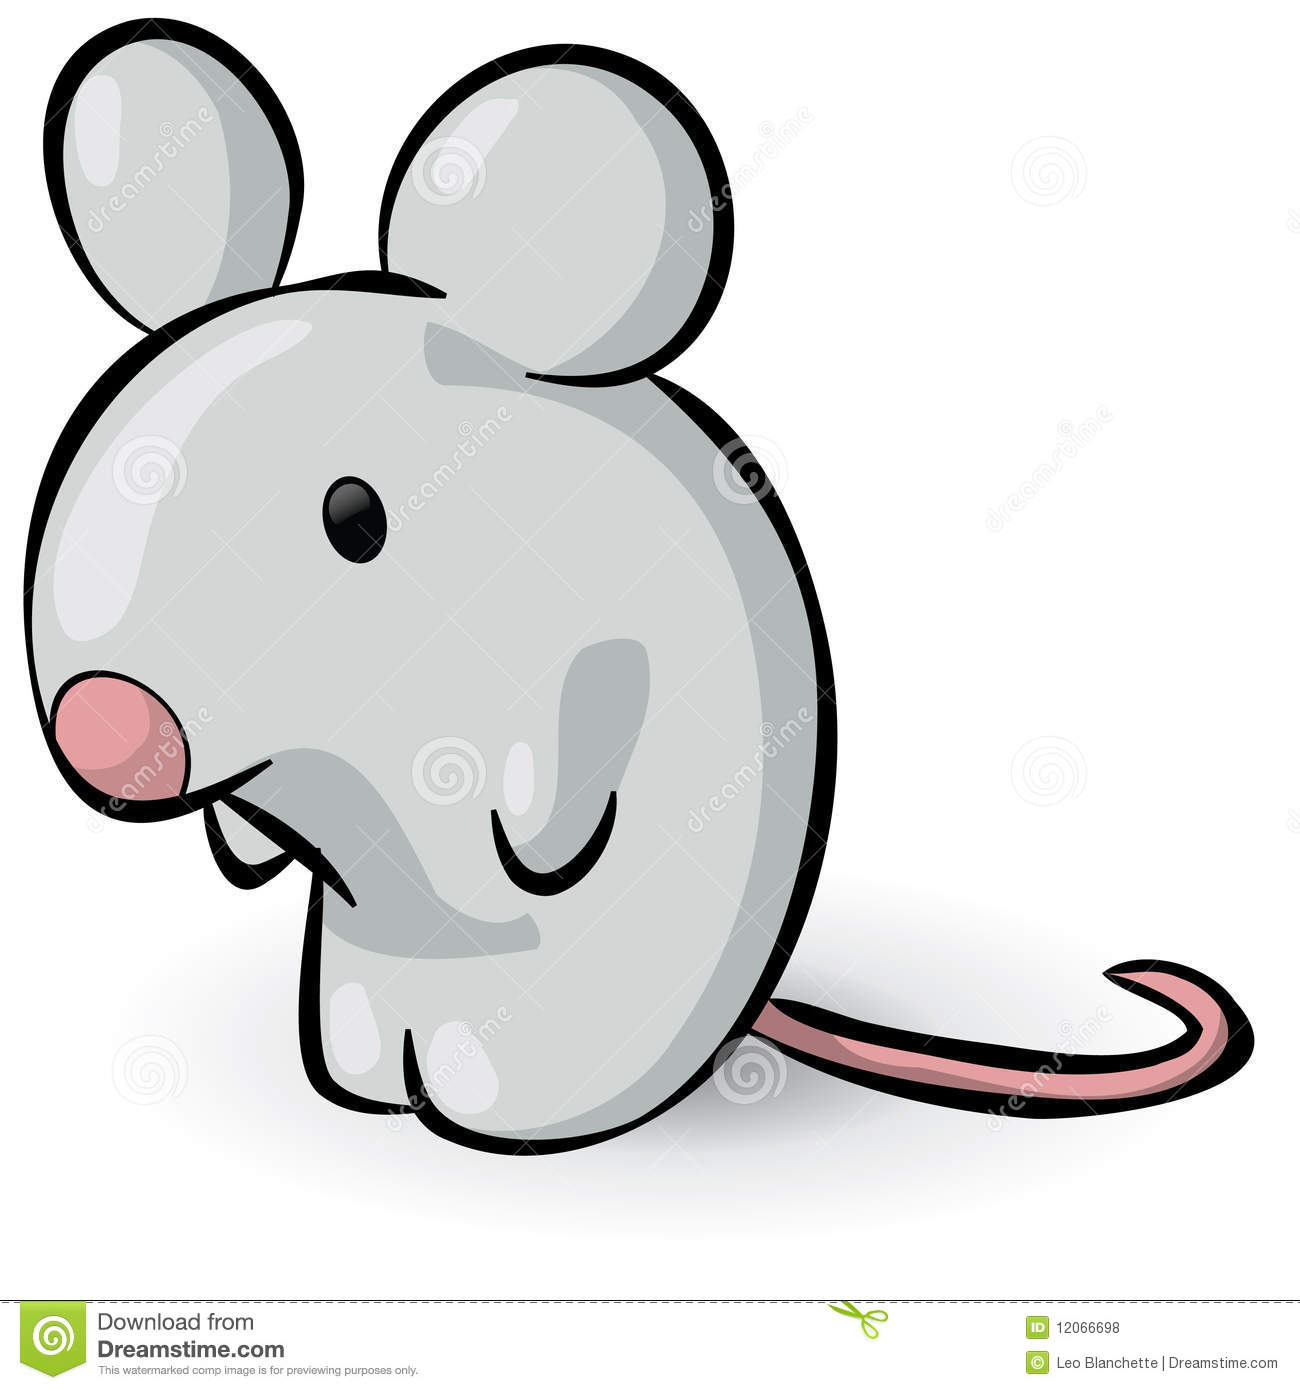 Pictures cartoon mice.